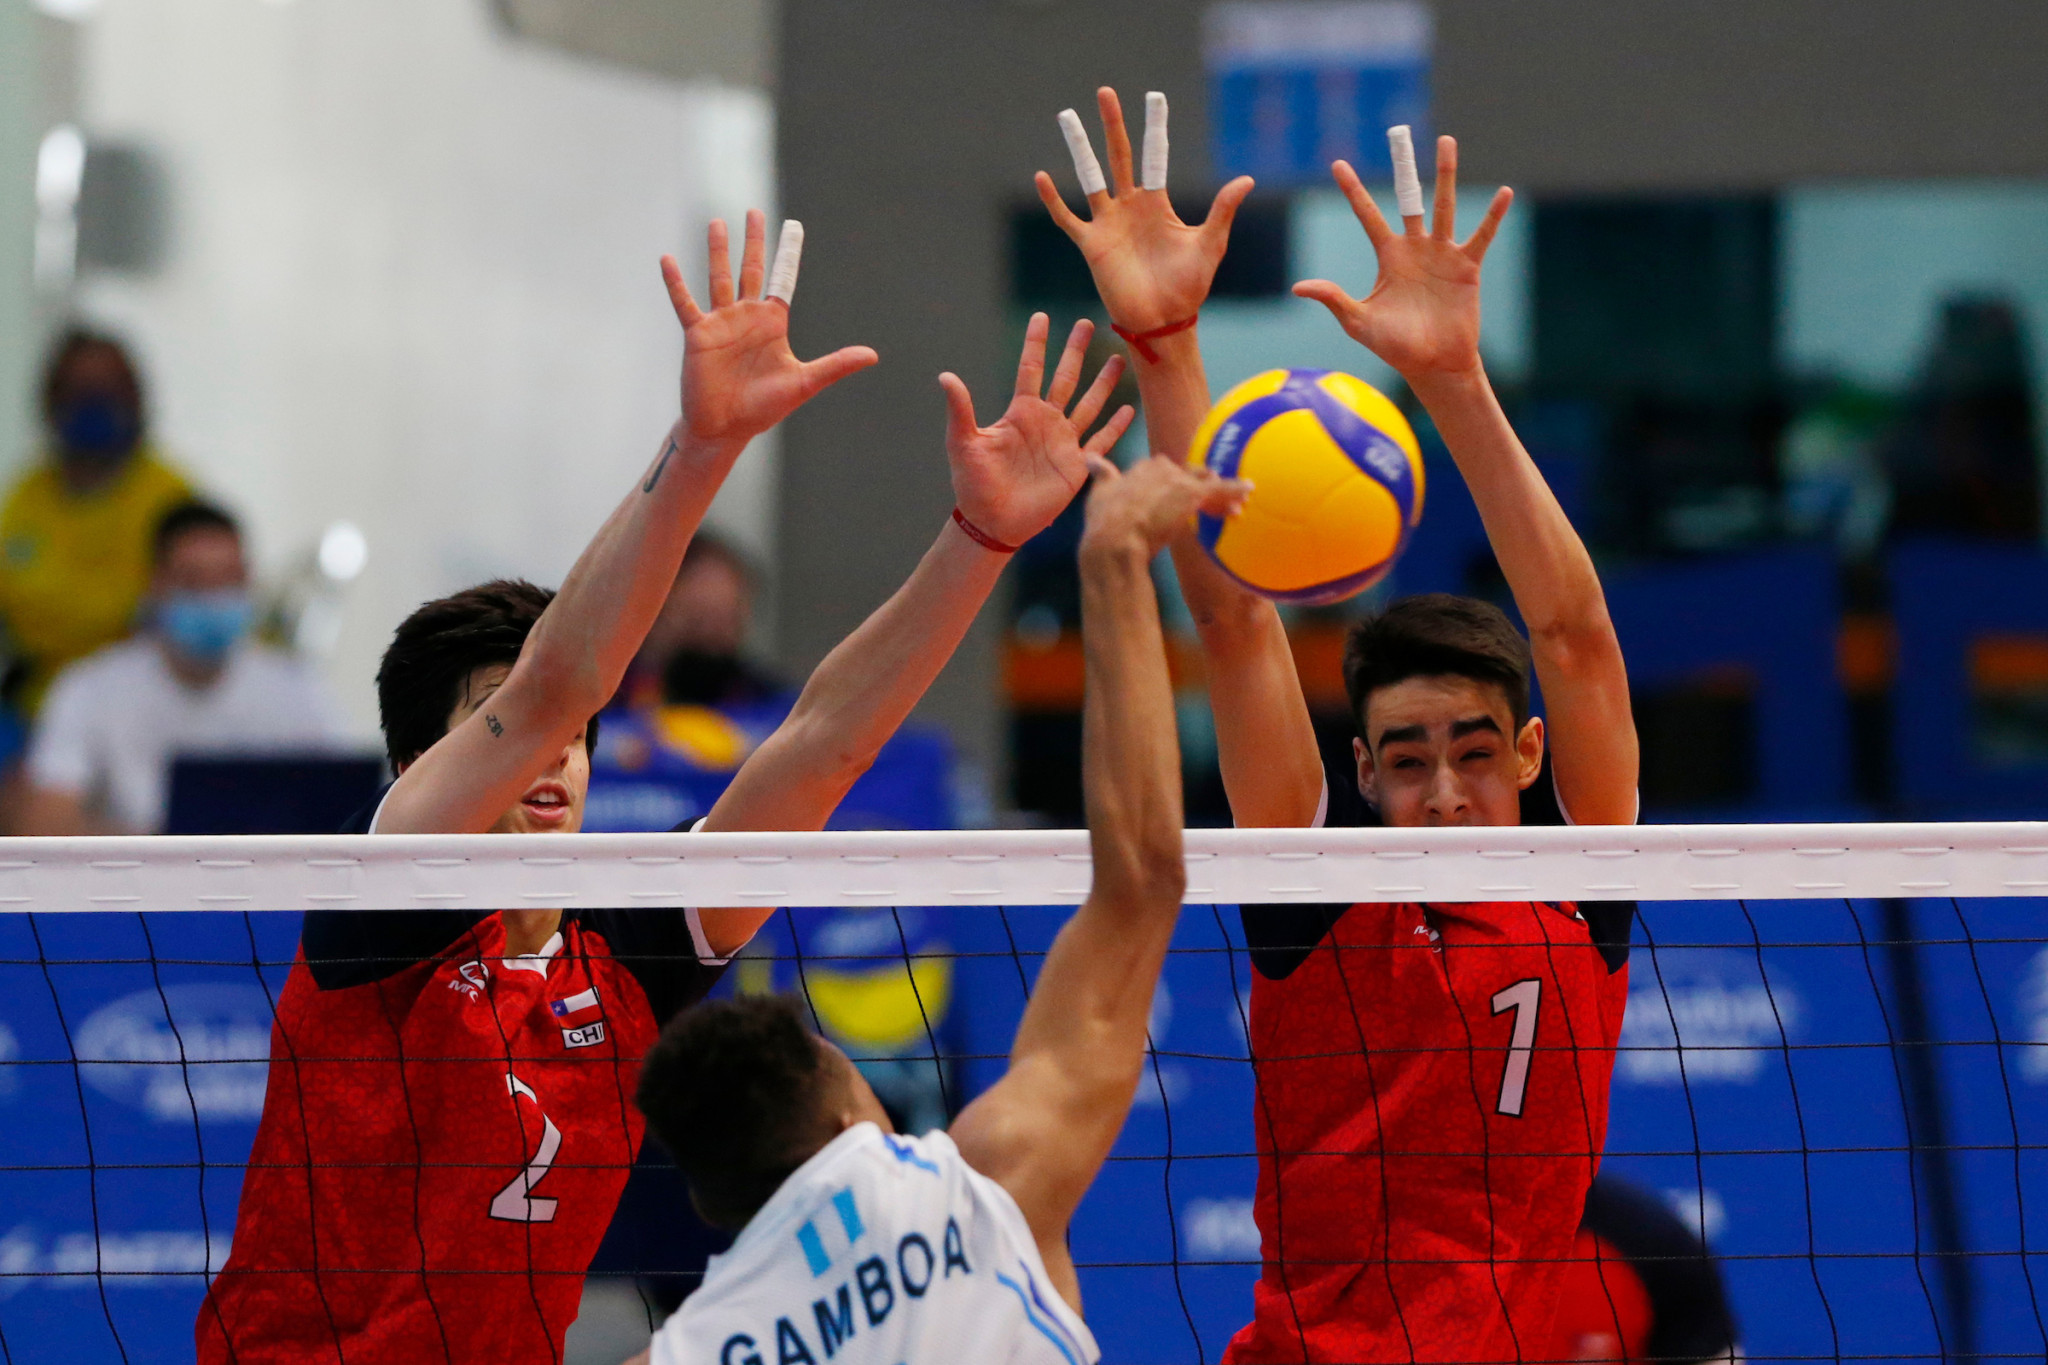 Chile beat Guatemala 3-0 to confirm their seventh place finish in the men's volleyball tournament ©Agencia.Xpress Media